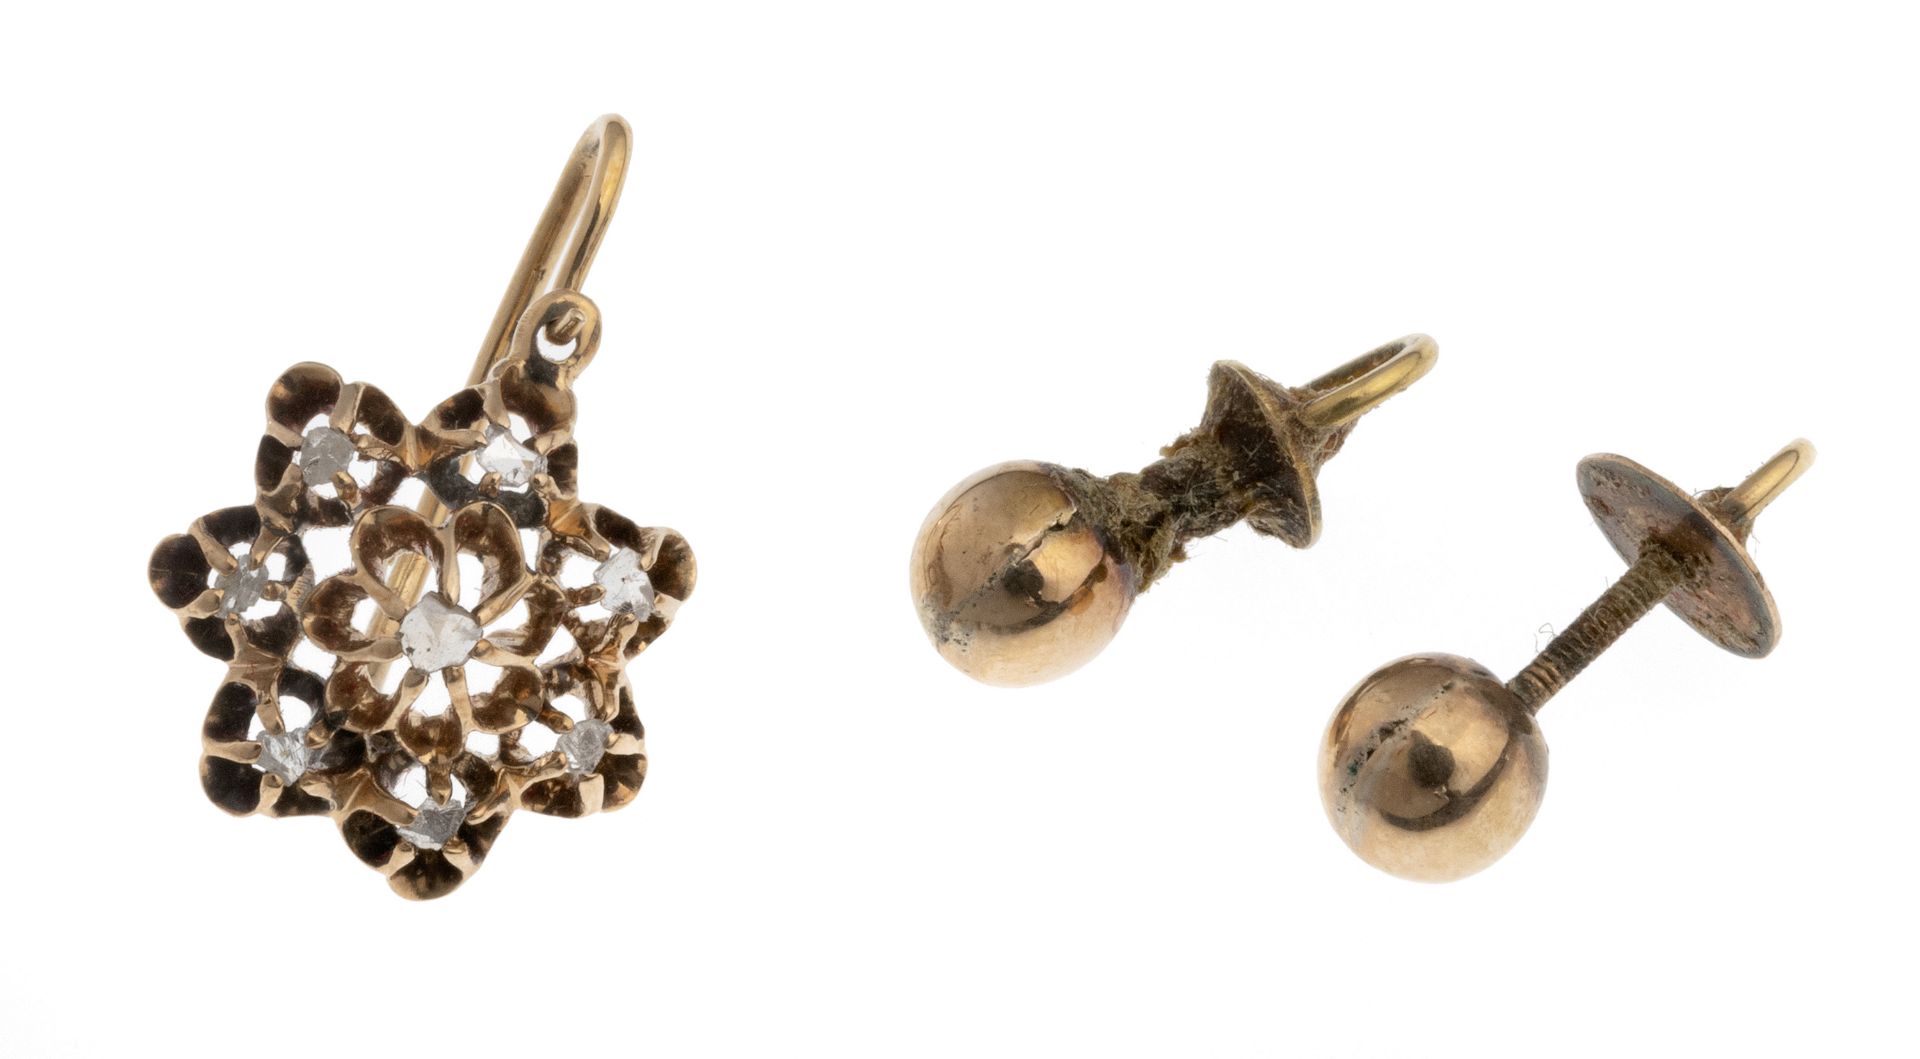 PAIR OF GOLD EARRINGS AND A GOLD SOLITAIRE EARRING